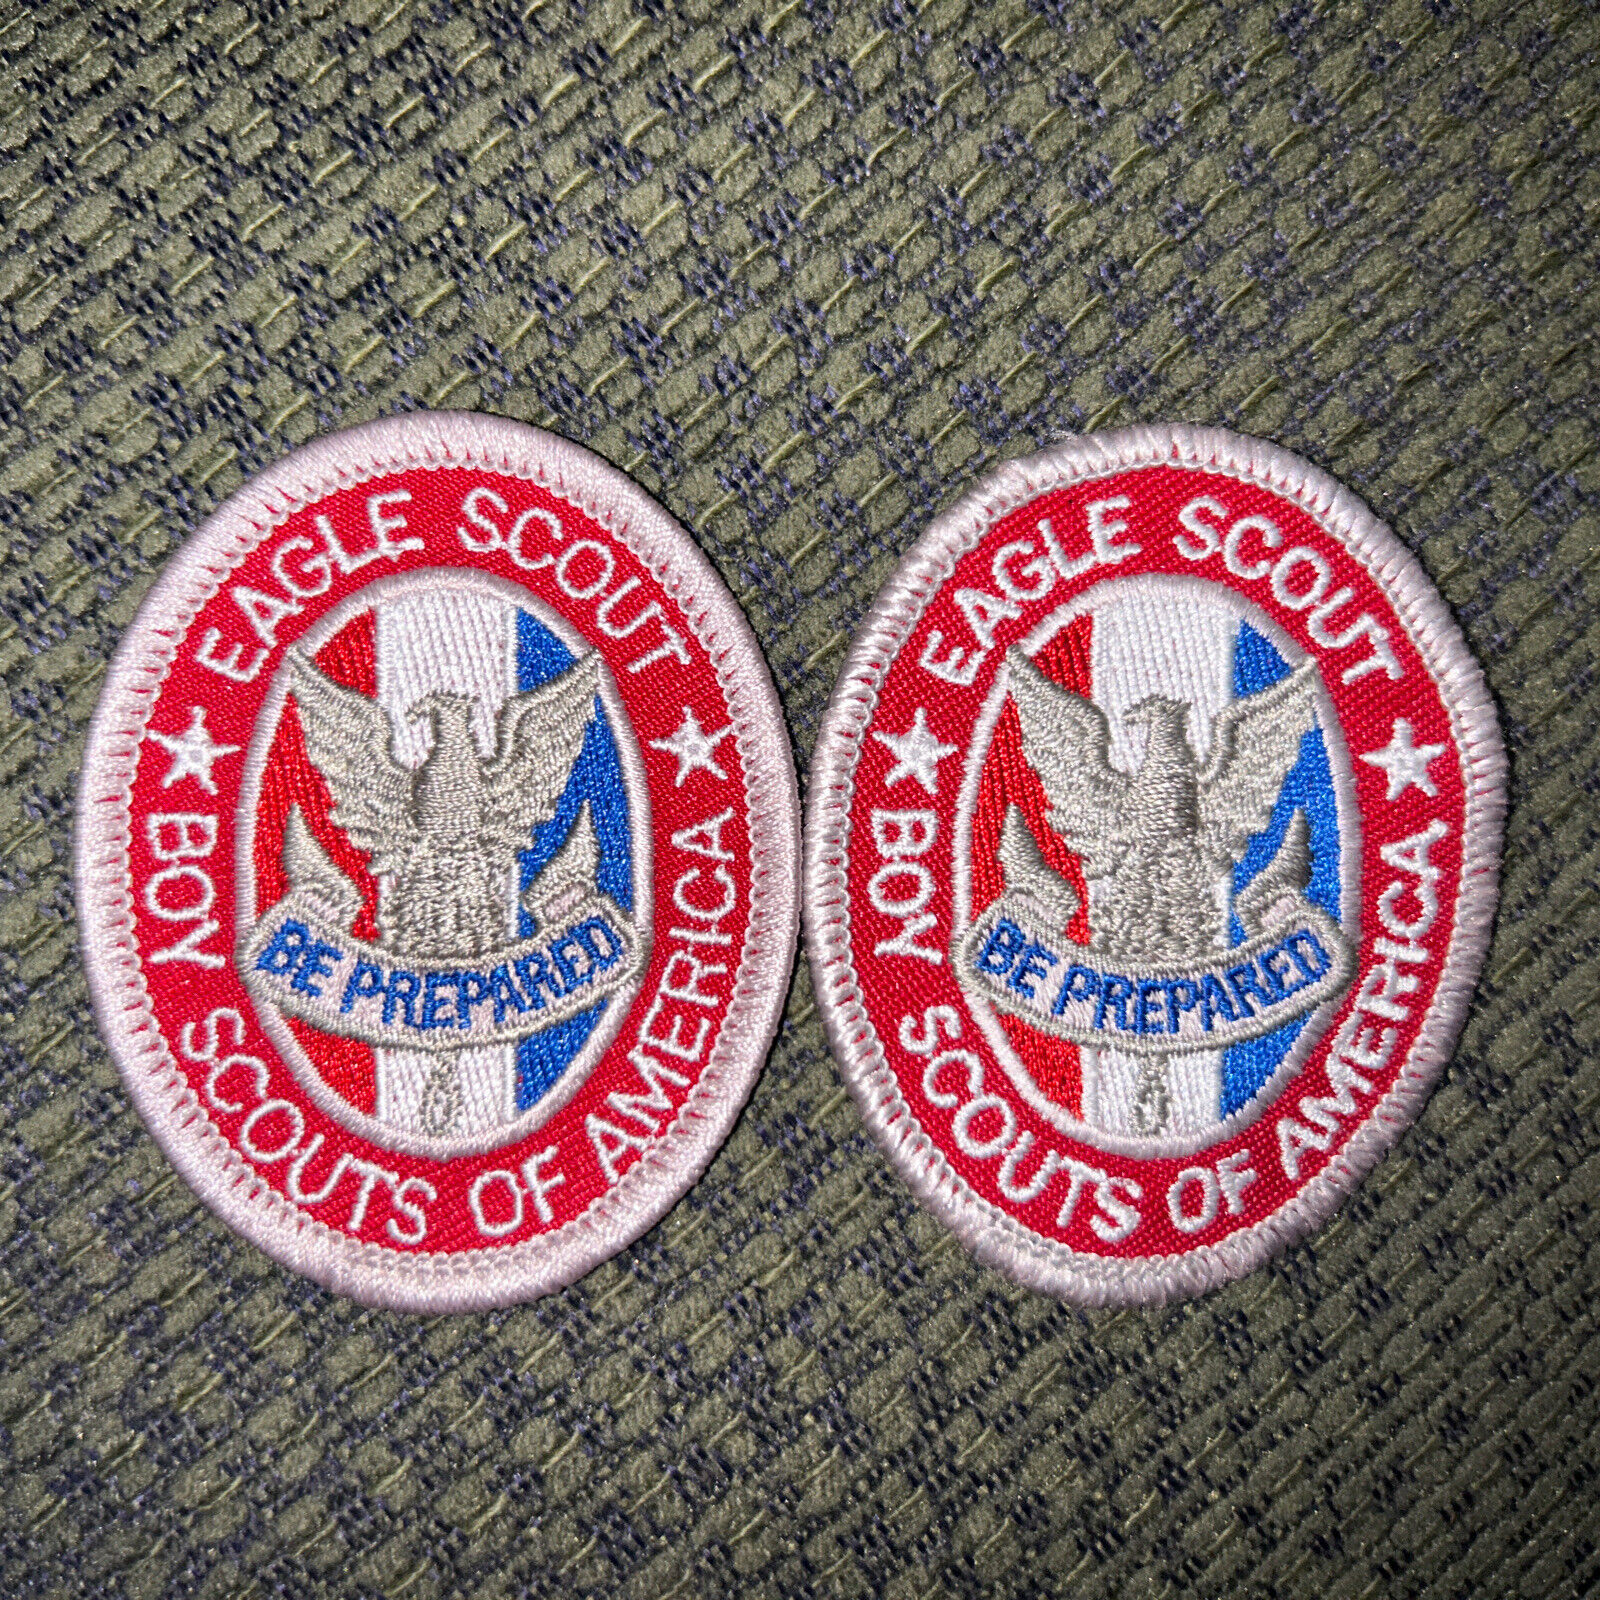 Recent Issue  Eagle Scout Rank Oval Boy Scout Patch